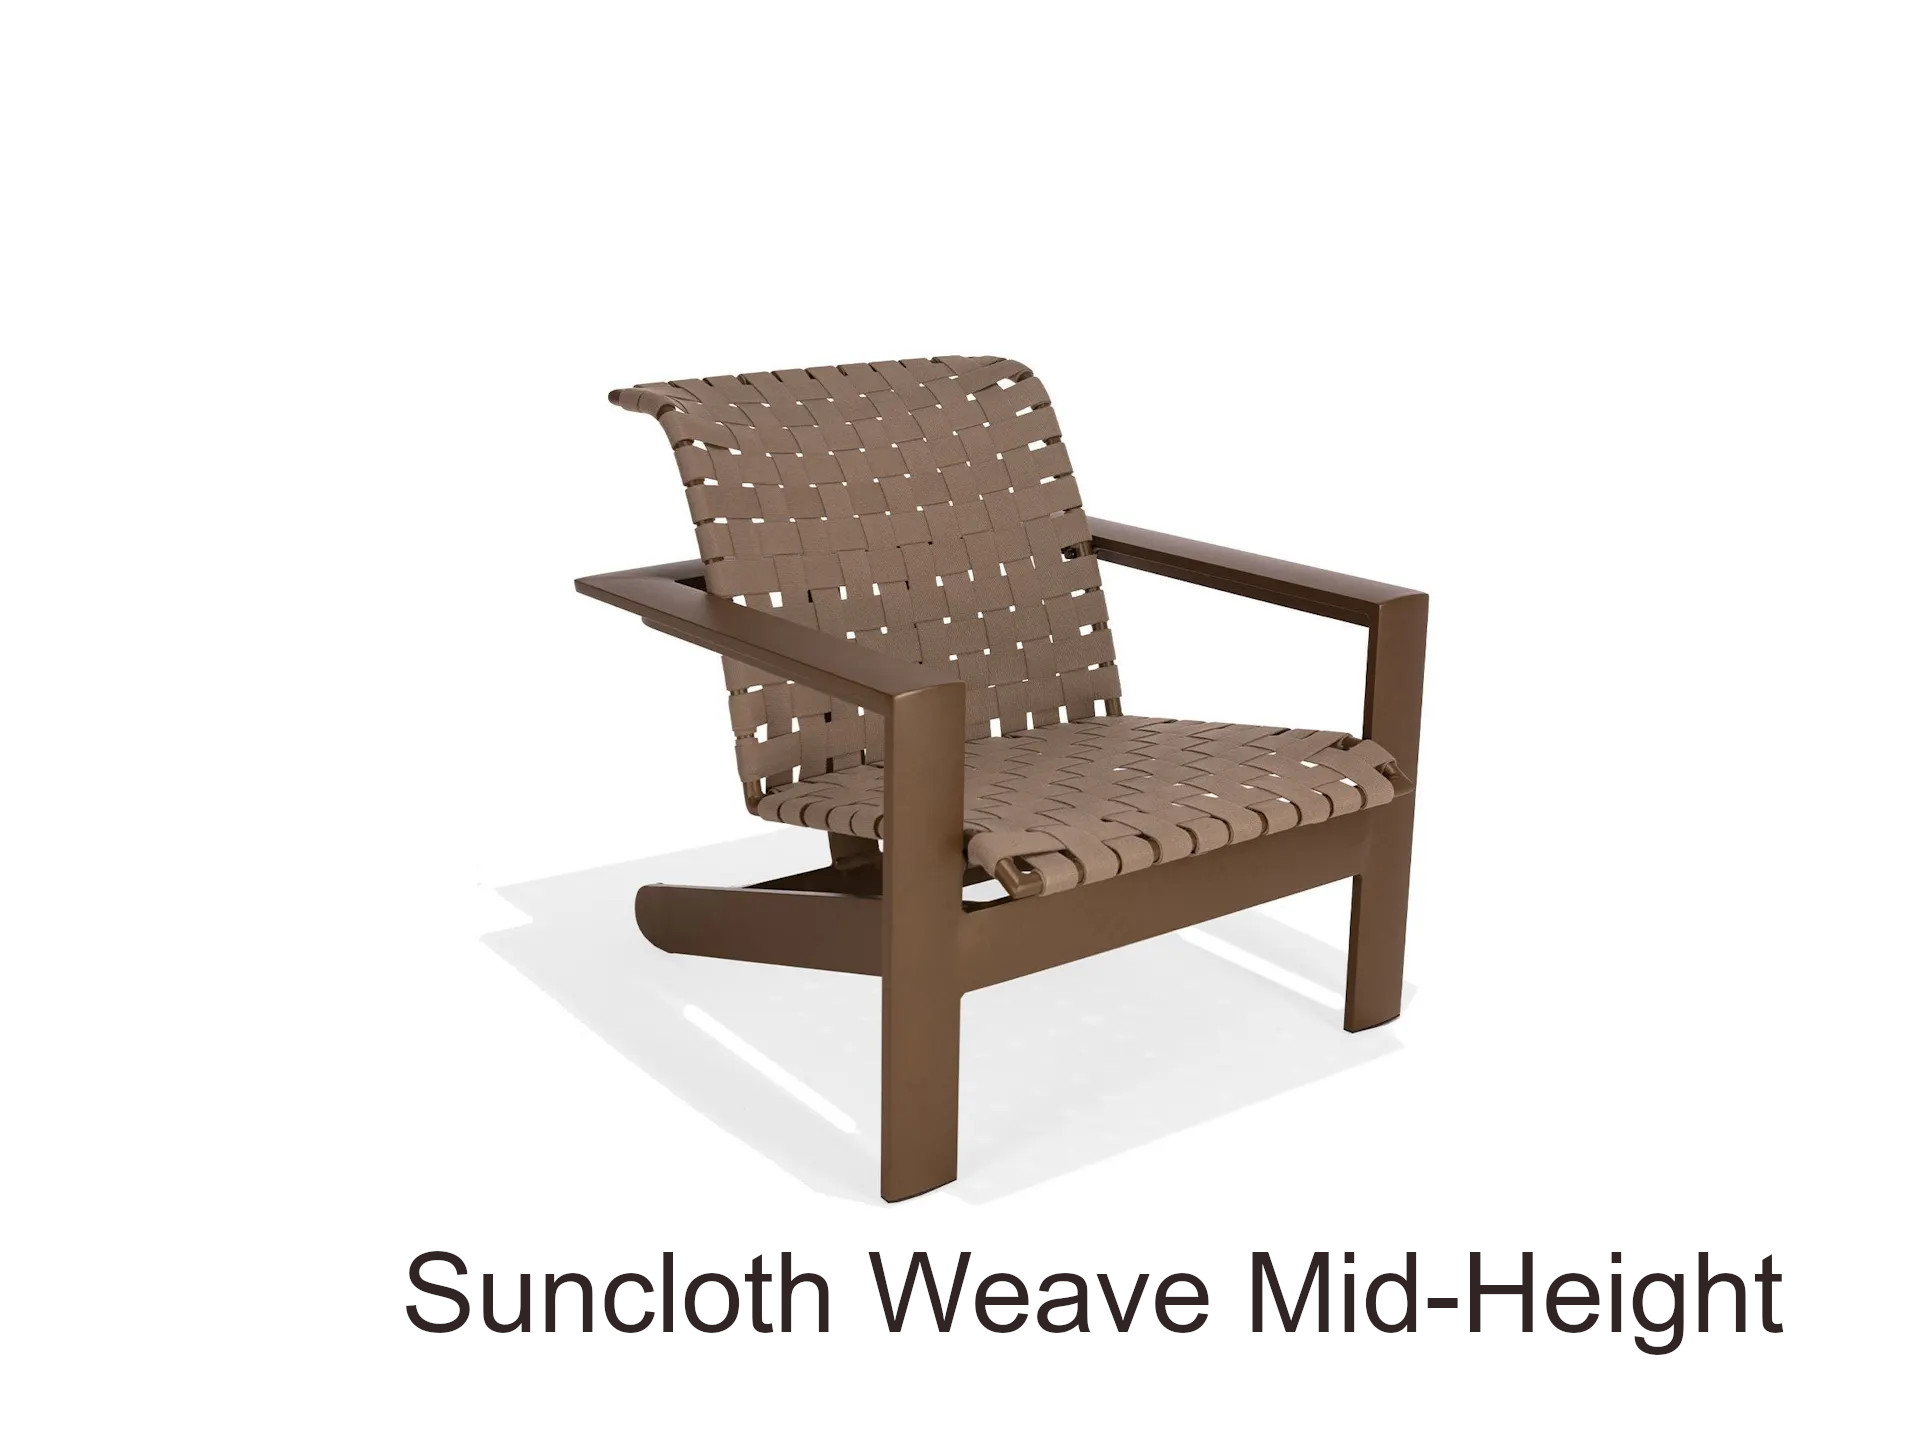 Suncloth Weave Mid-Height Adirondack Chair